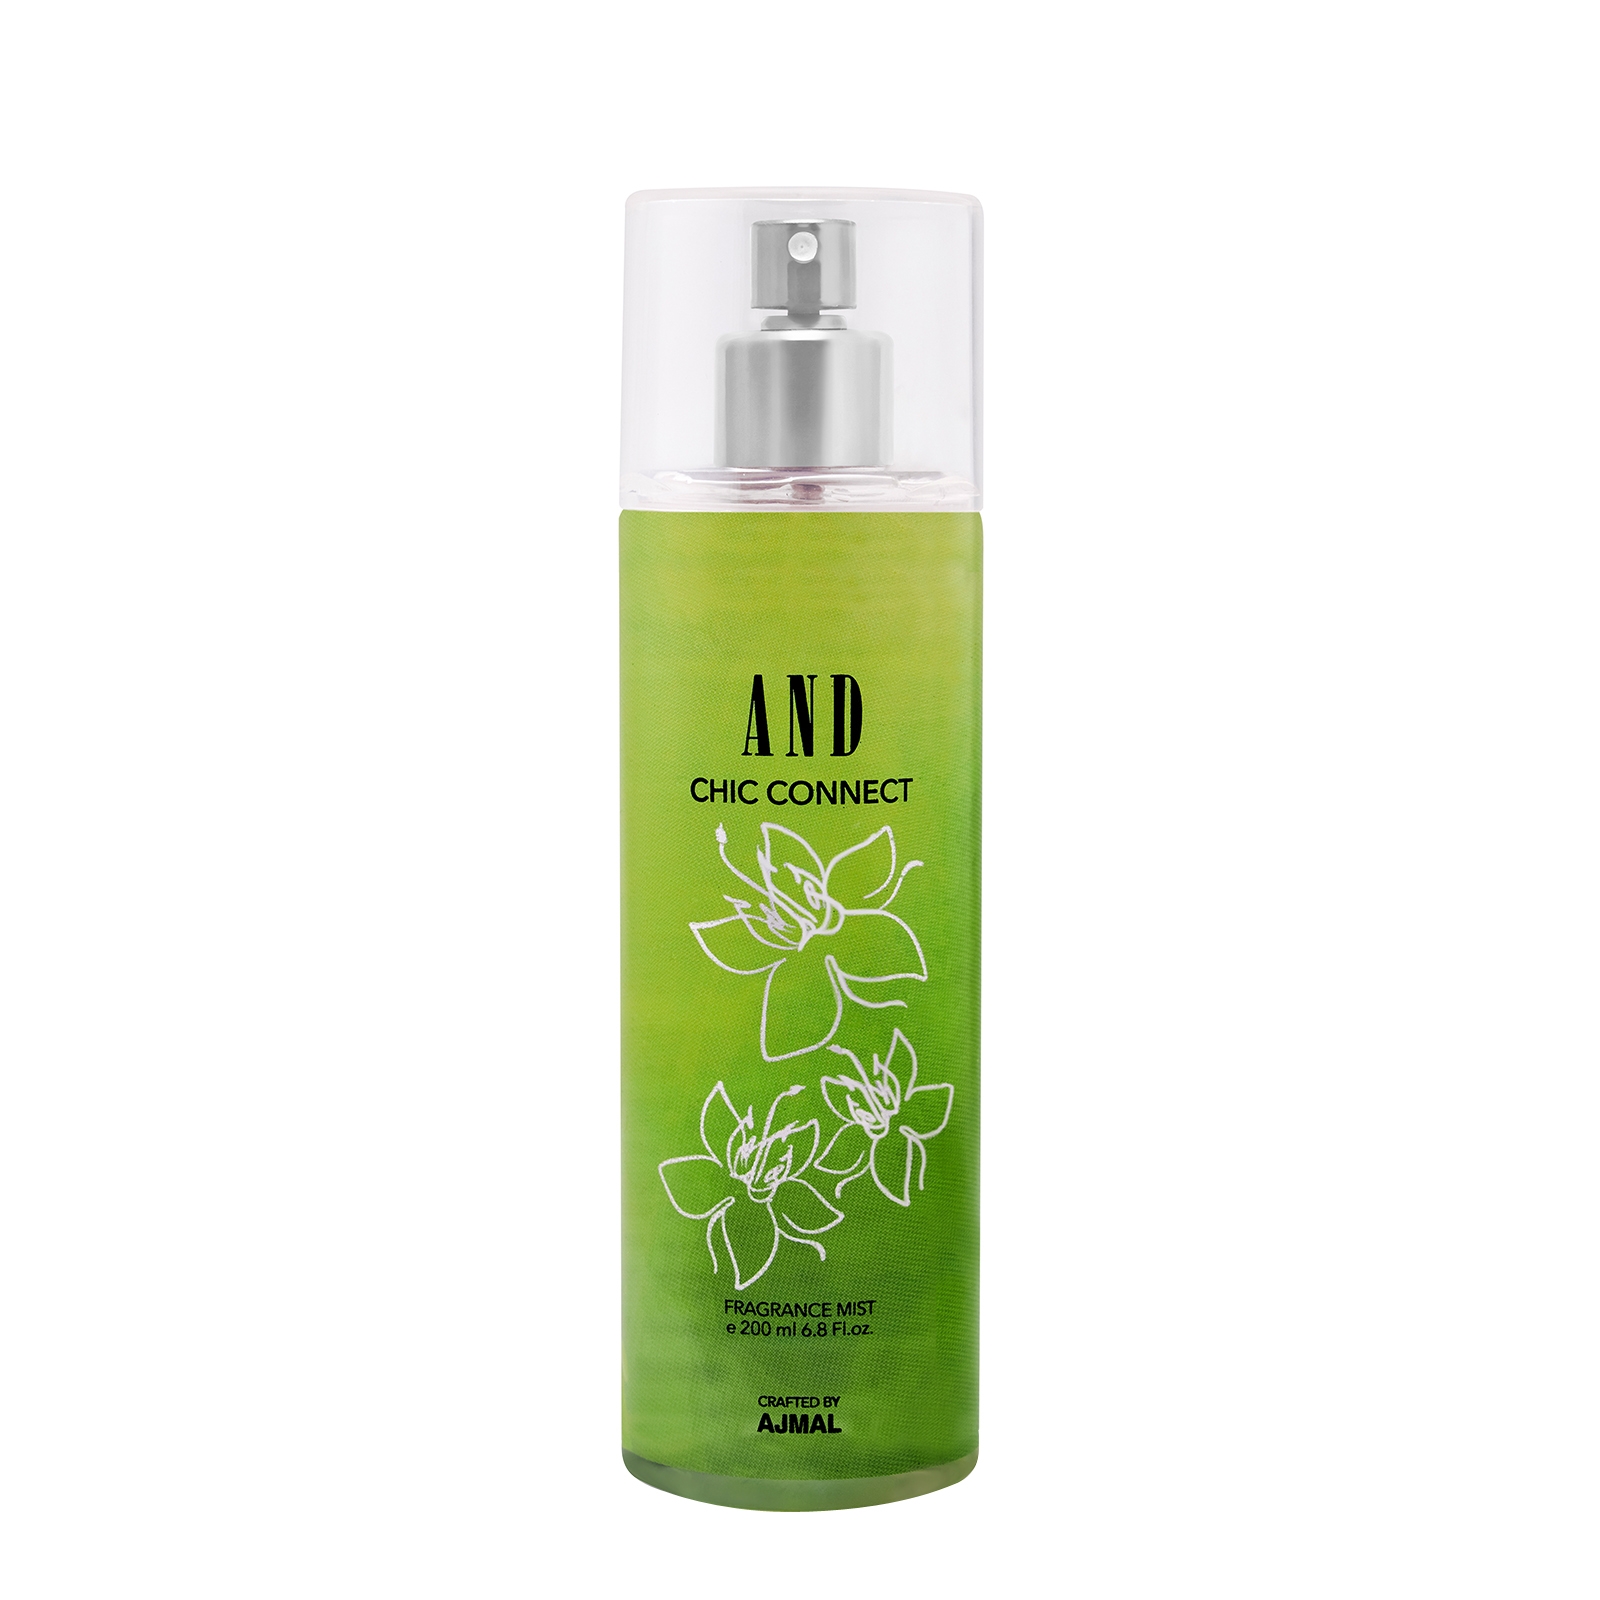 AND Crafted By Ajmal | AND Chic Connect Body Mist 200ML for Women Crafted by Ajmal